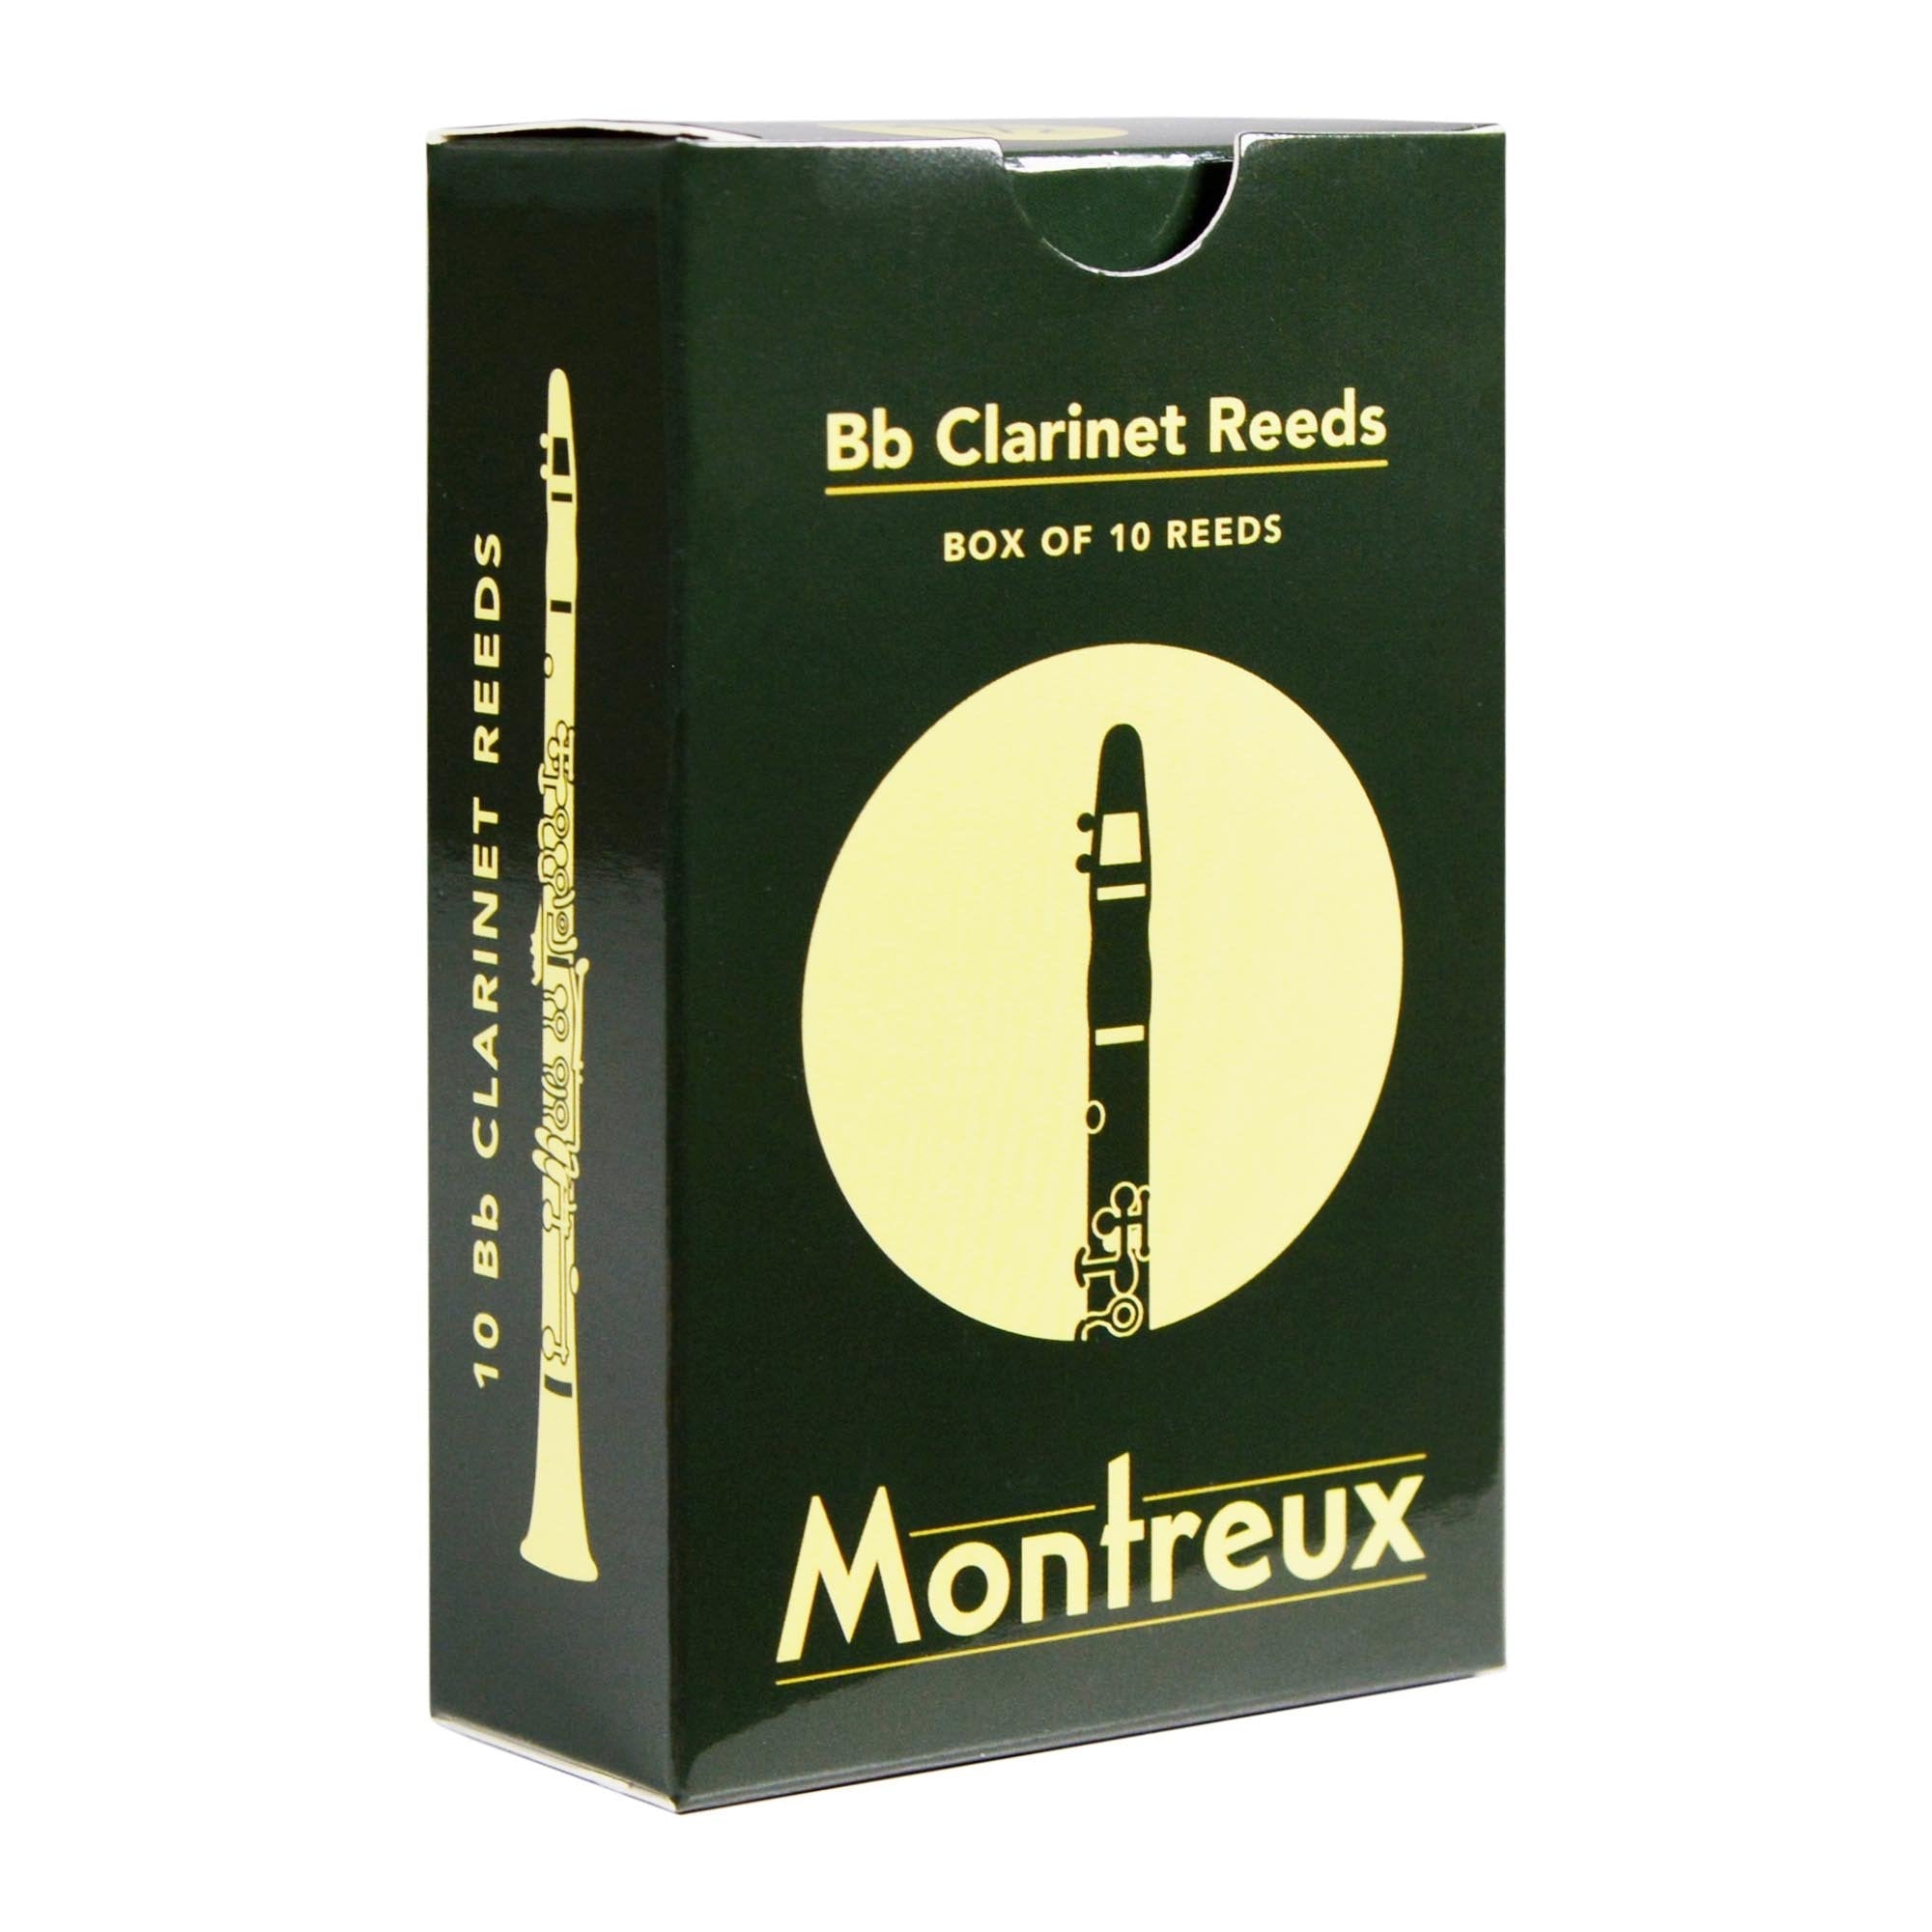 Montreux Bb Clarinet Reeds - Box of 10 Reeds